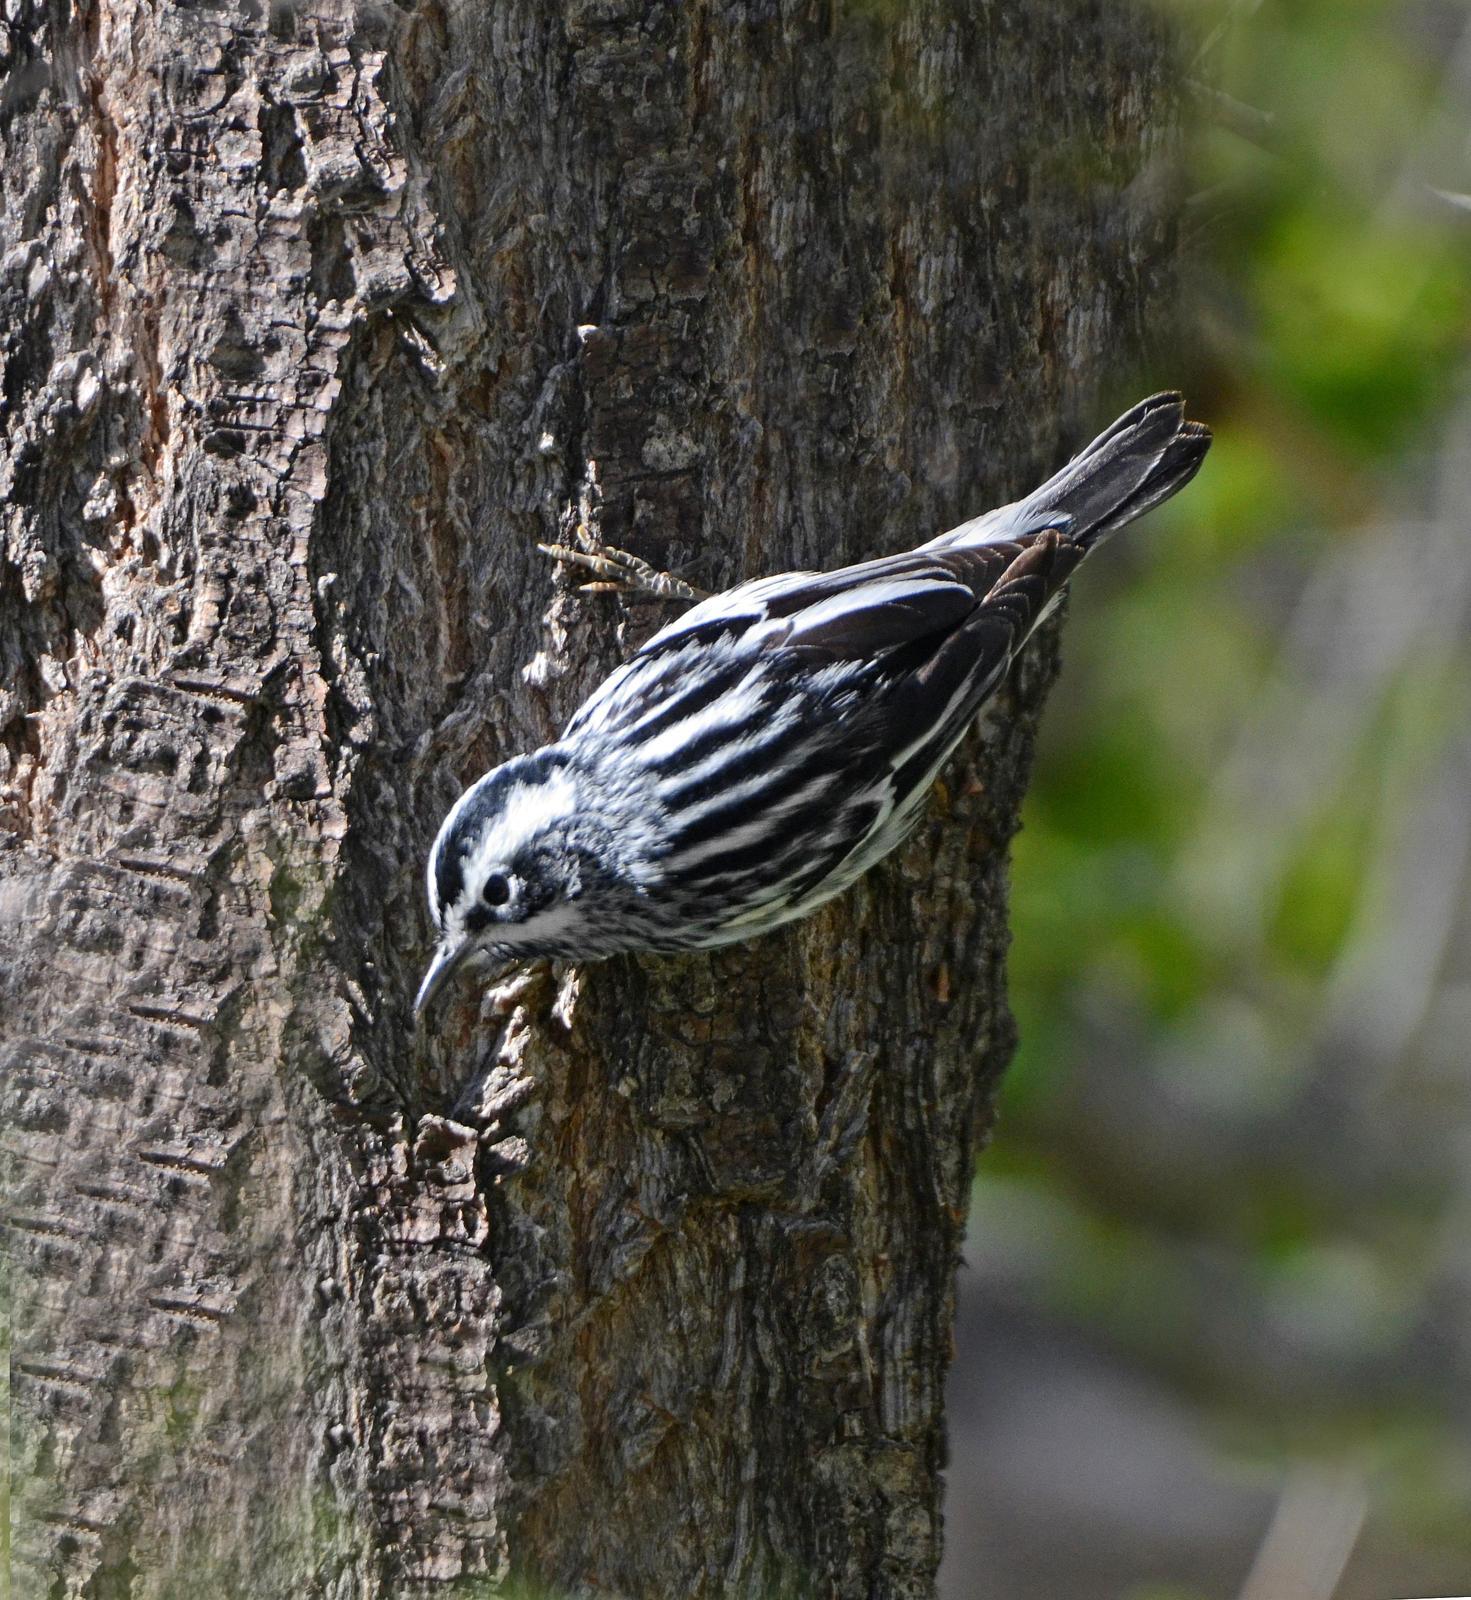 Black-and-white Warbler Photo by Steven Mlodinow